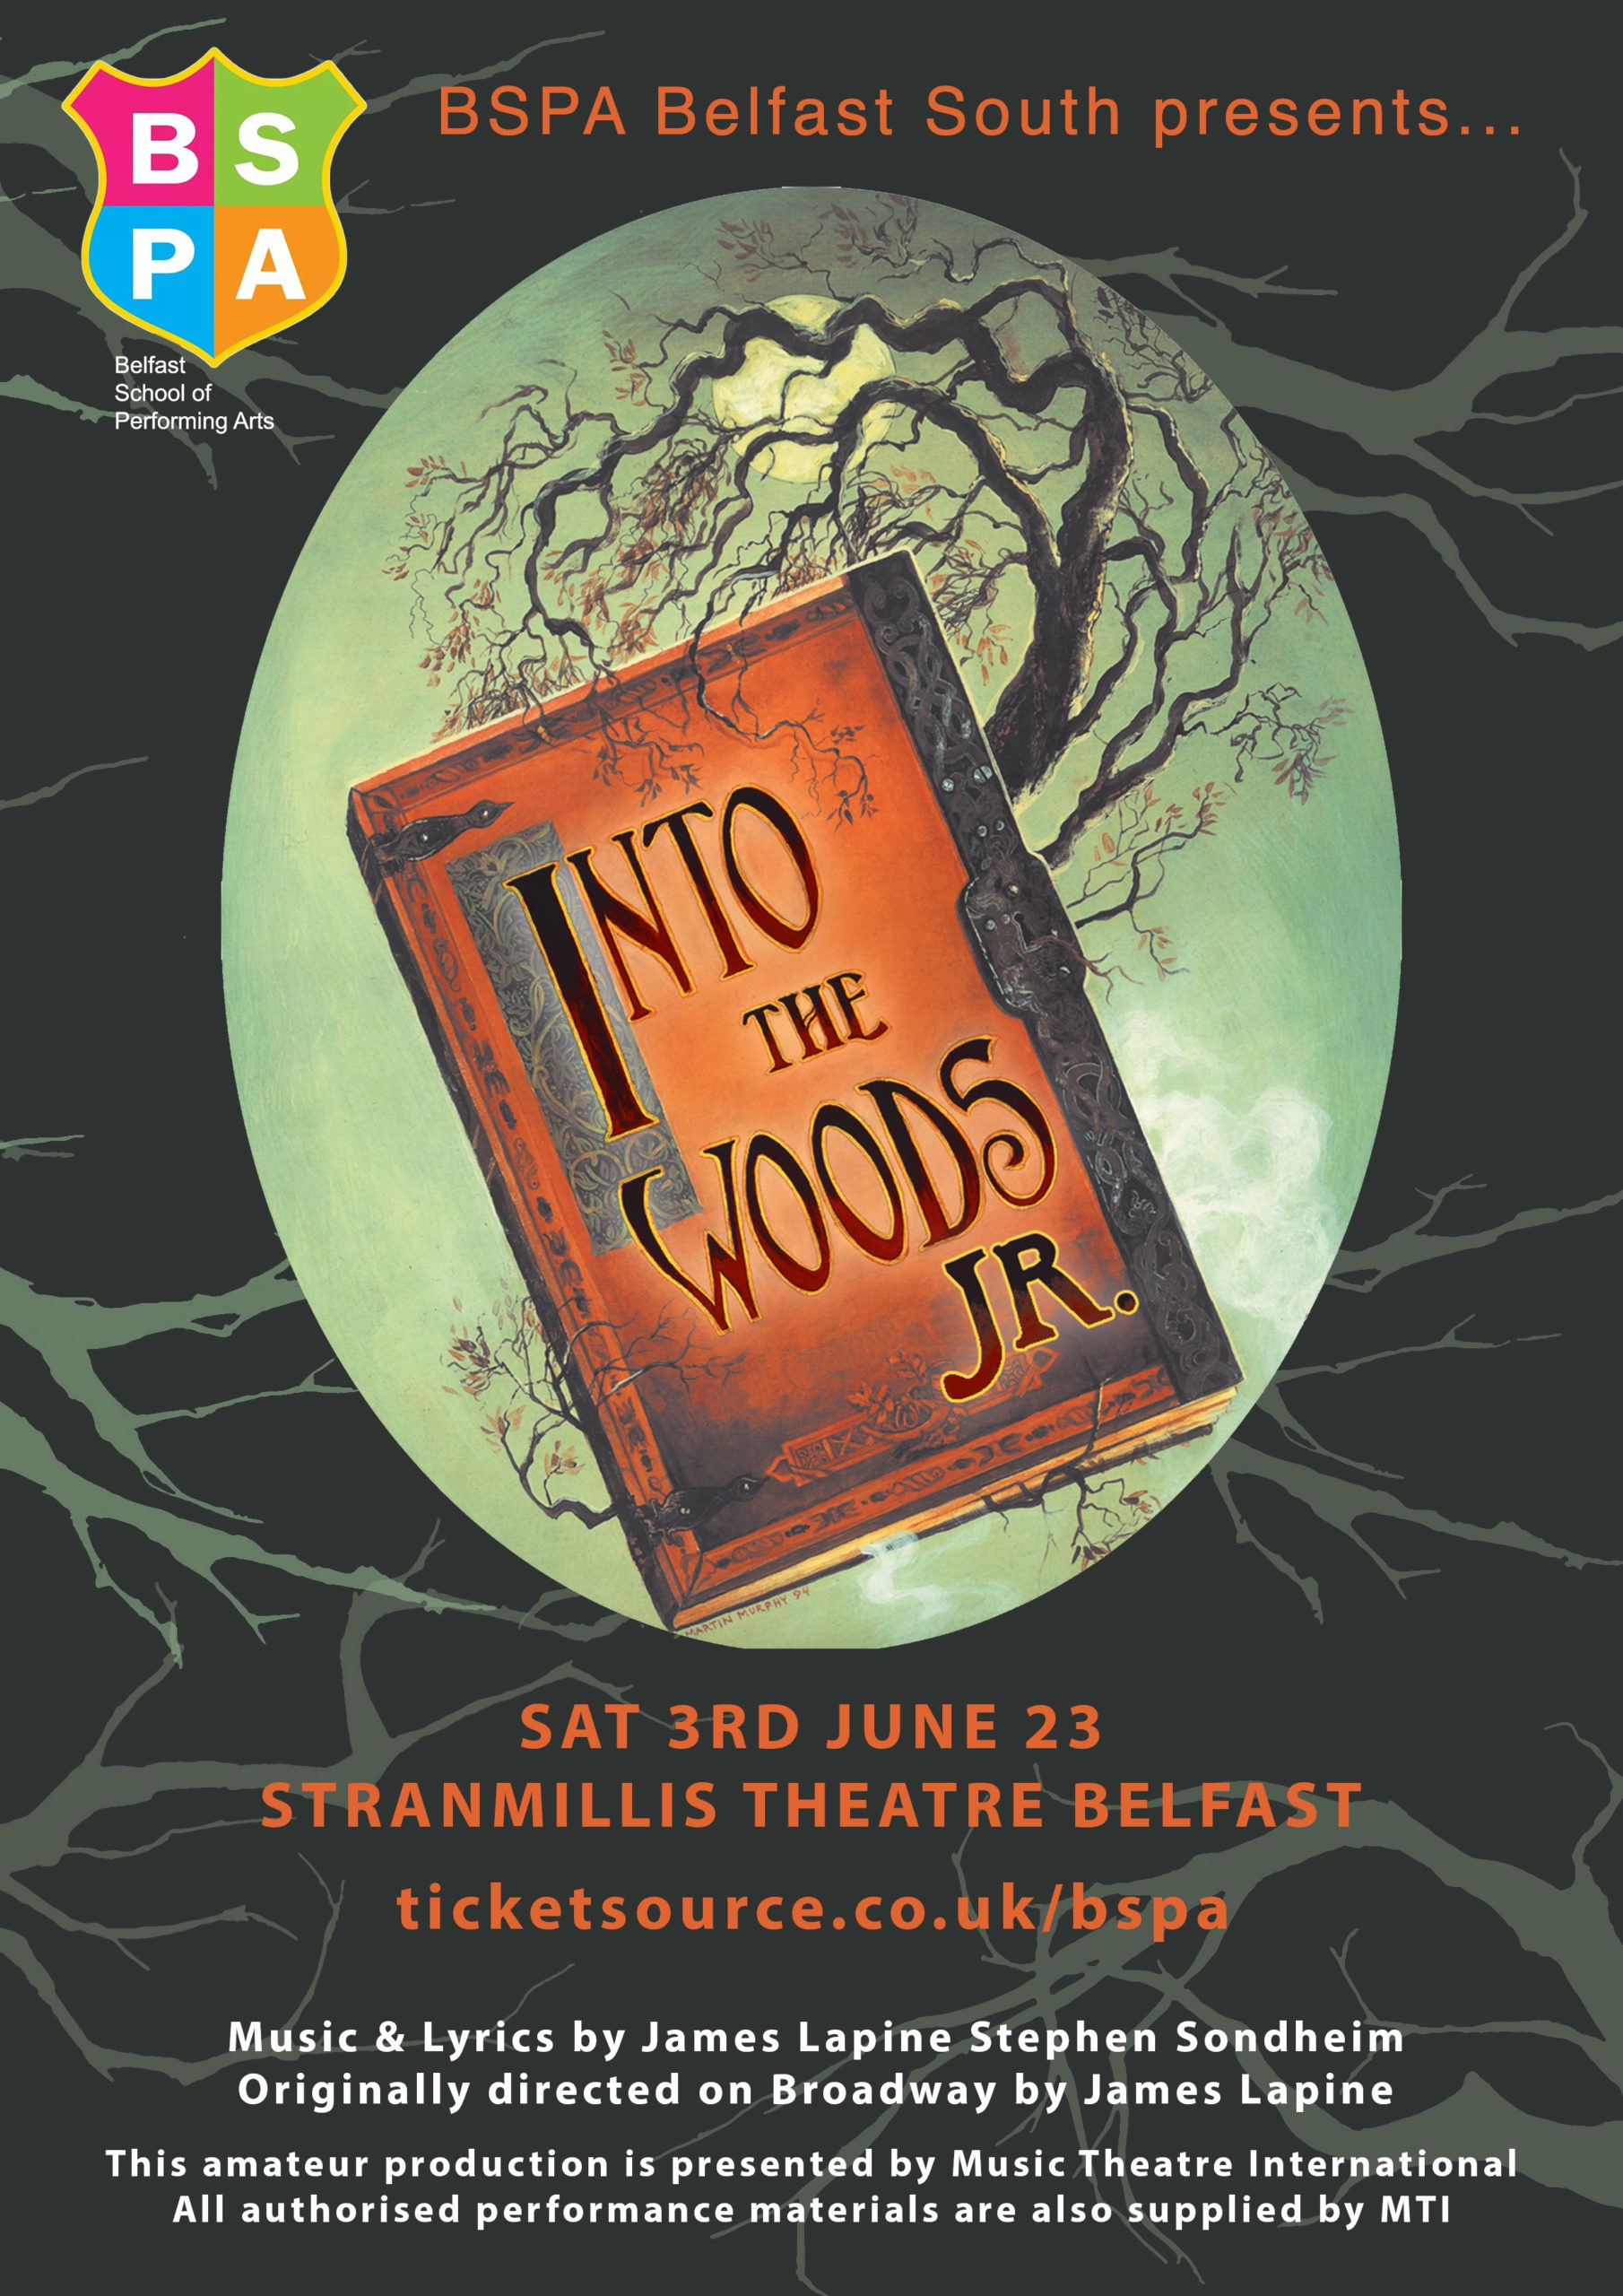 BSPA BELFAST SOUTH presents “INTO THE WOODS JR” image